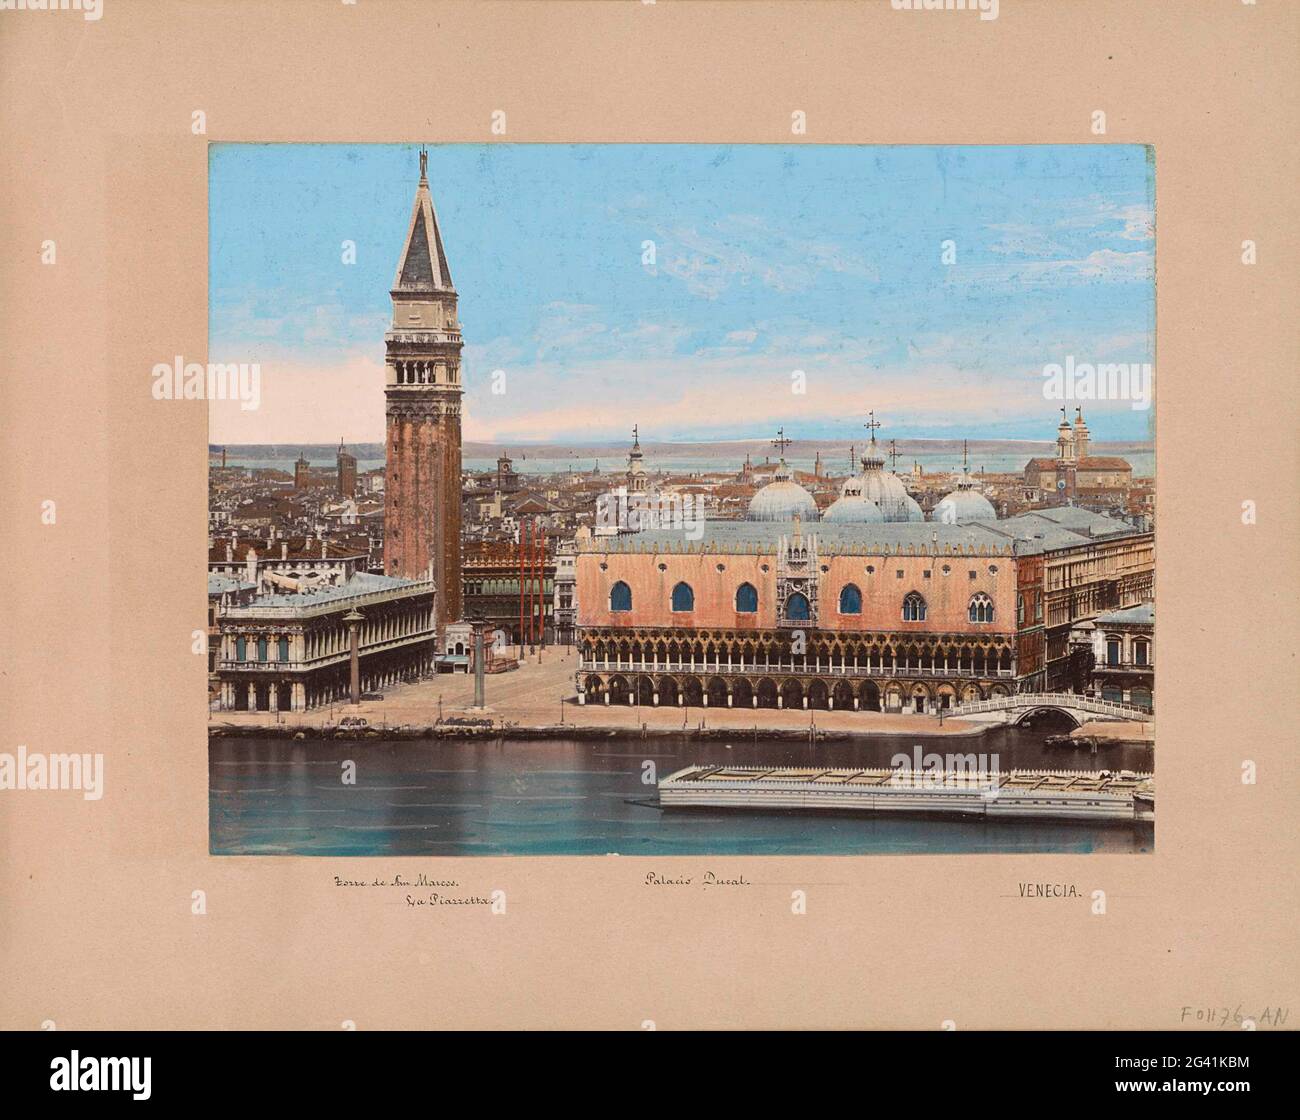 View of the Doge Palace, the Campanile and surrounding buildings in Venice; Torre de San Marco, La Piazetta, Palacio Ducal, Venecia. Part of travel album with photos and drawings by Manuel Mayo 1876. Stock Photo